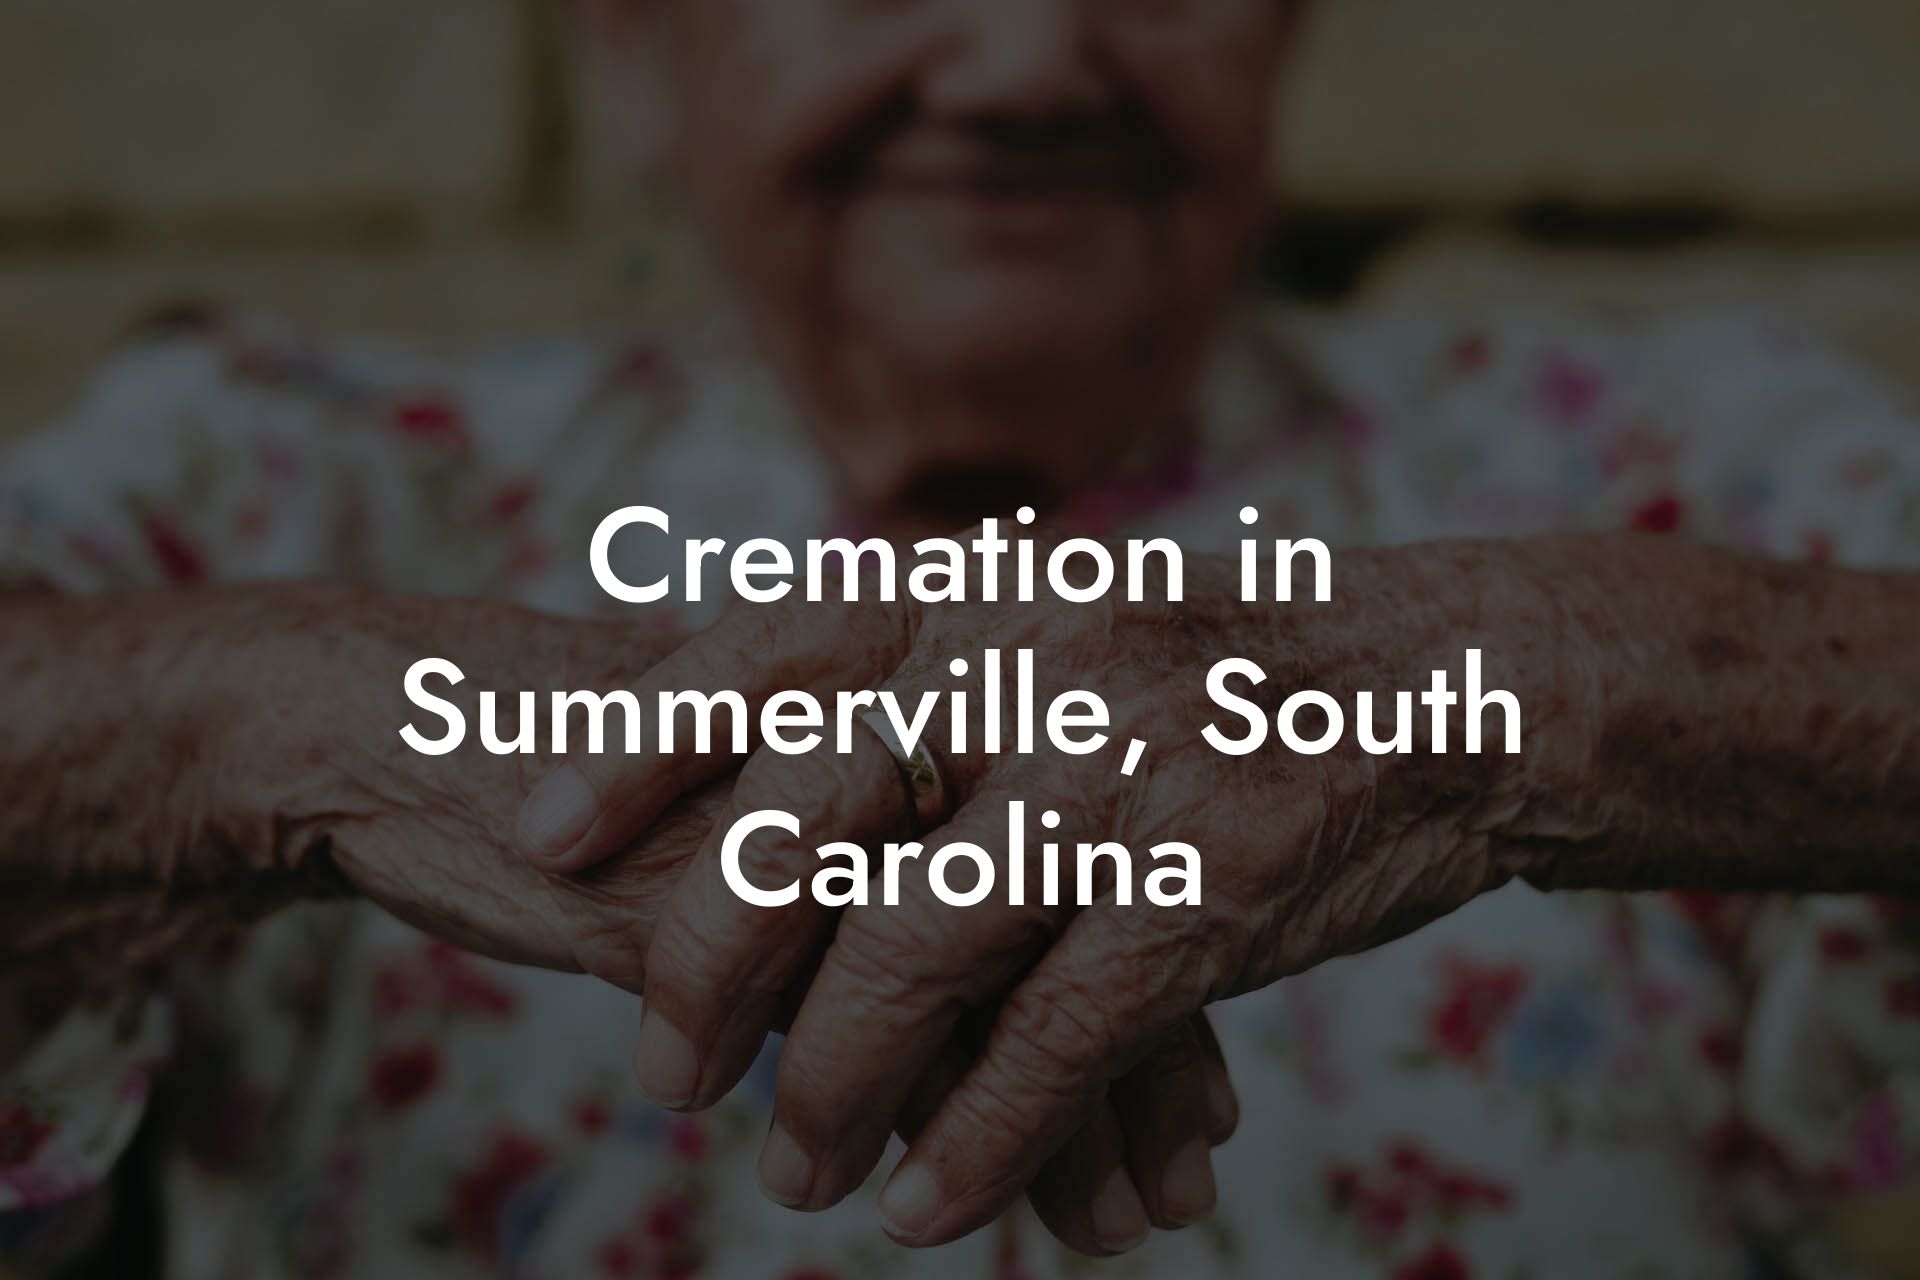 Cremation in Summerville, South Carolina